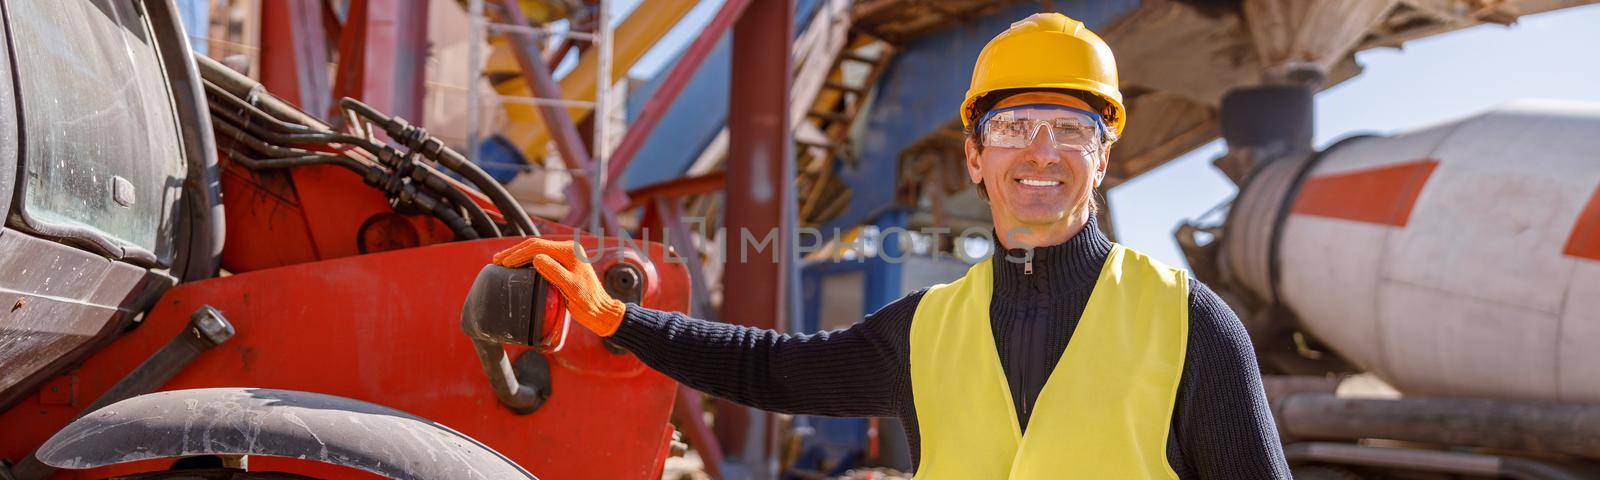 Cheerful man in work vest and safety helmet looking at camera and smiling while placing hand on truck